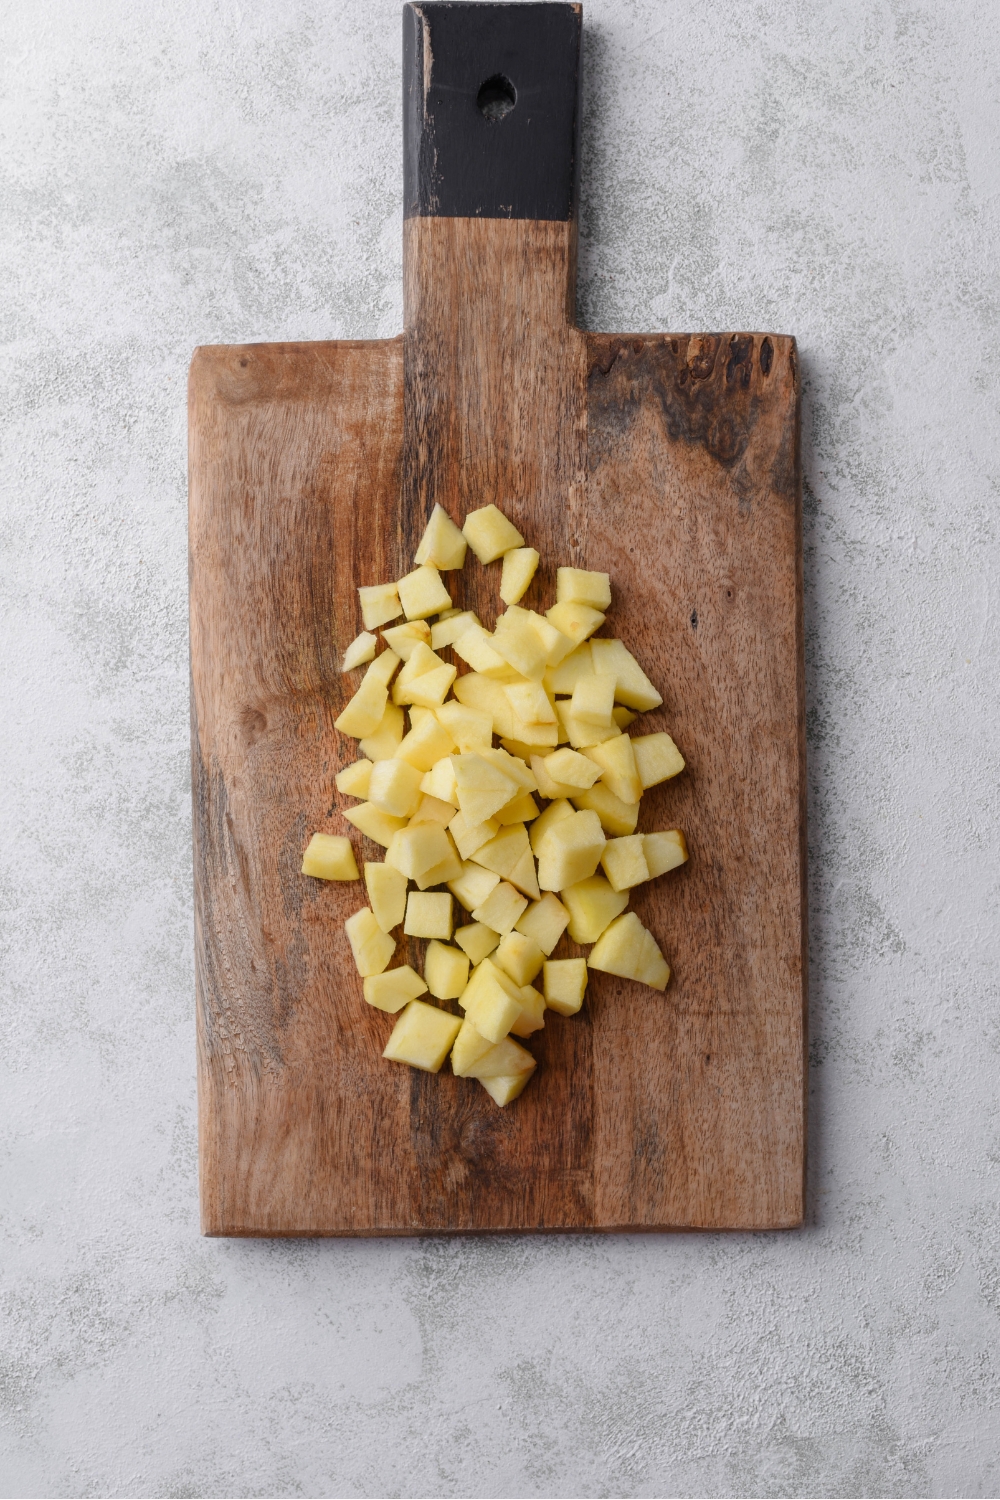 A cutting board filled with peeled and diced apples.